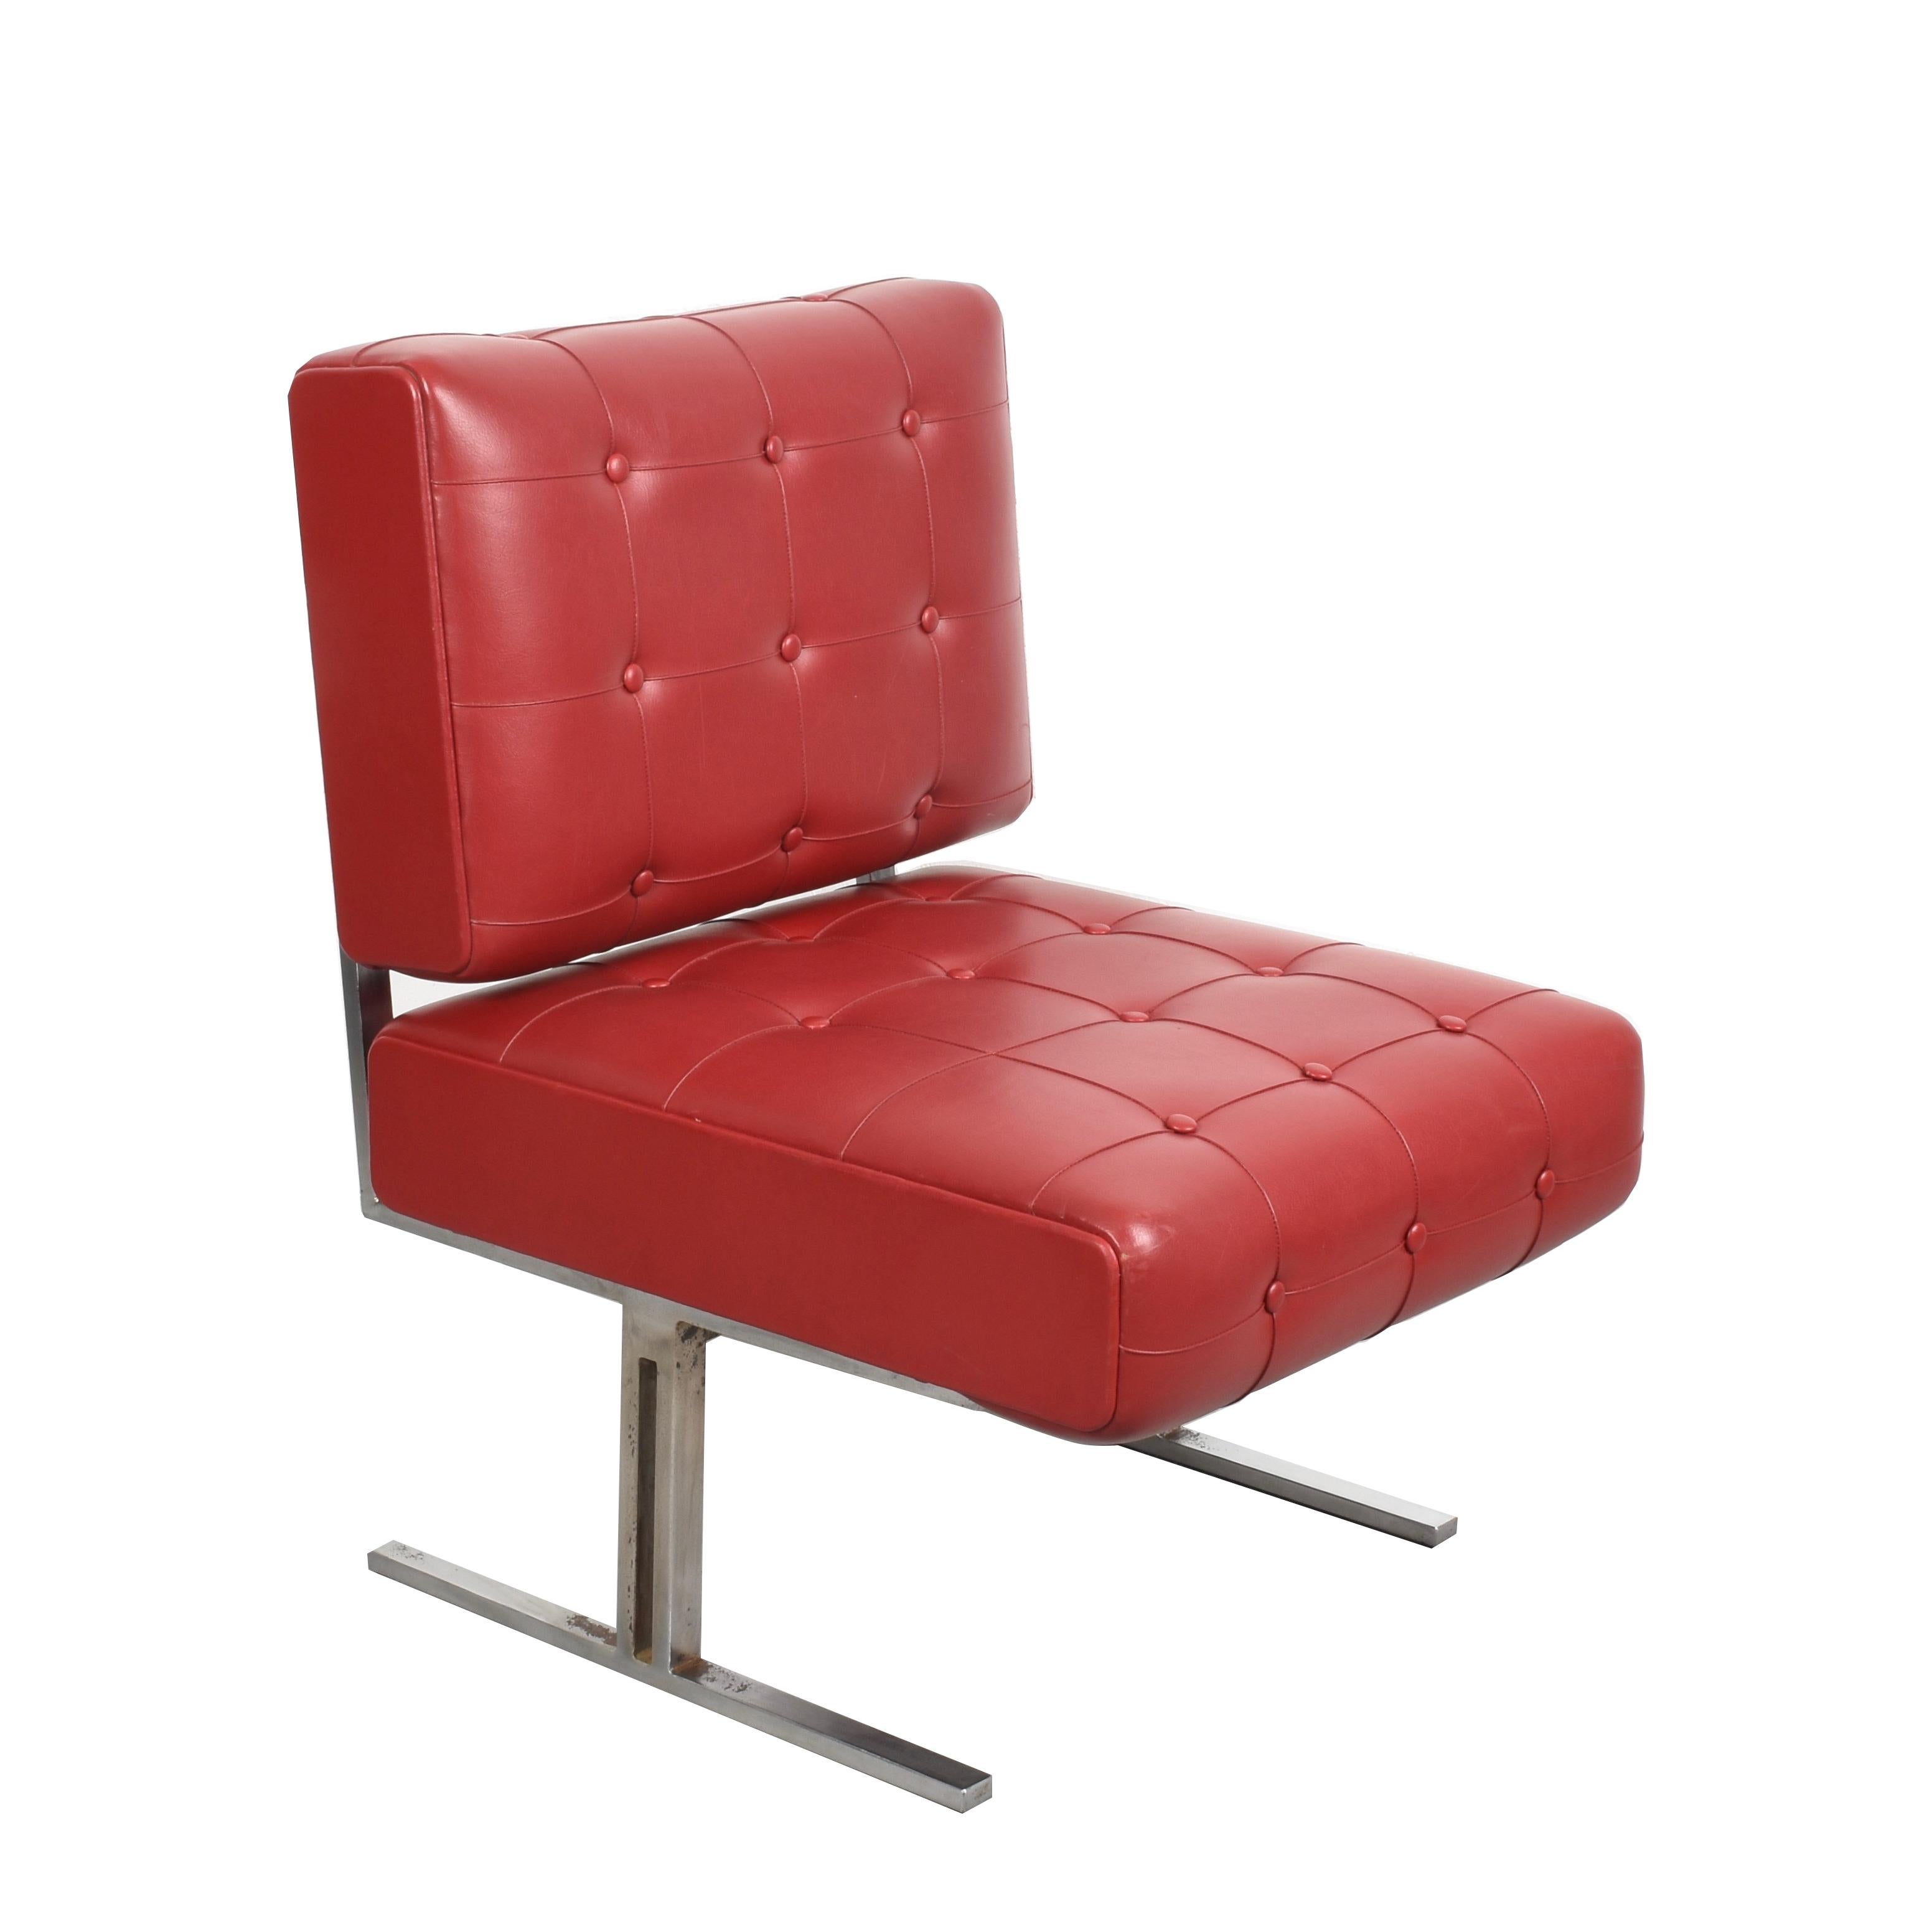 Mid-Century Modern Pair of Steel Armchairs Skay Capitonne Red, Style Hausmann De Sede Italy 1950s For Sale